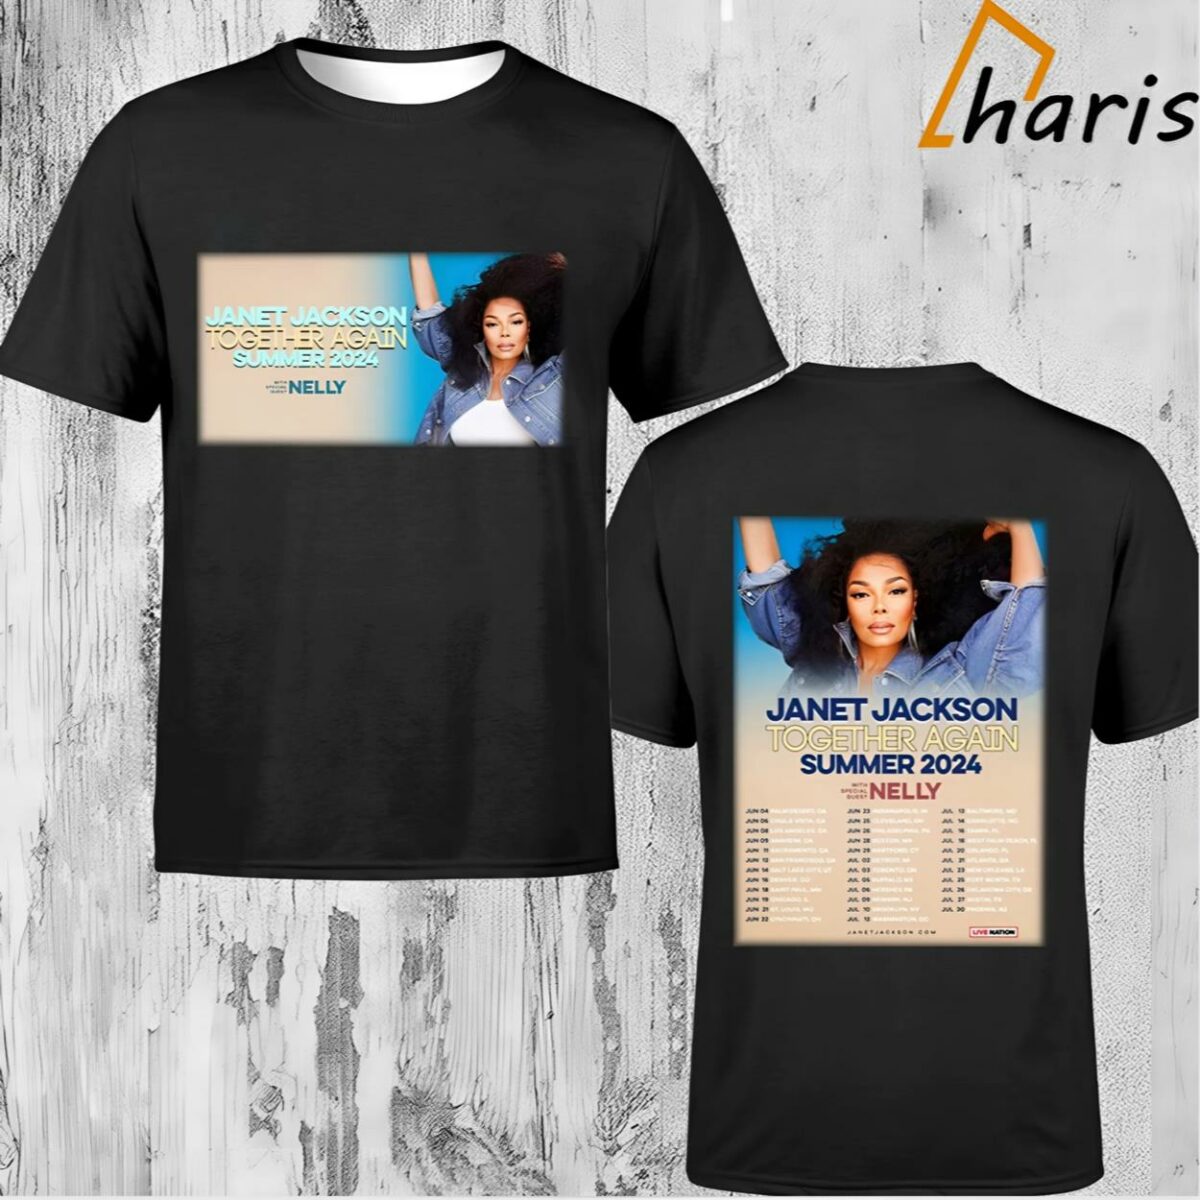 Janet Jackson Together Again Poster 2024 Tour T Shirt 1 1